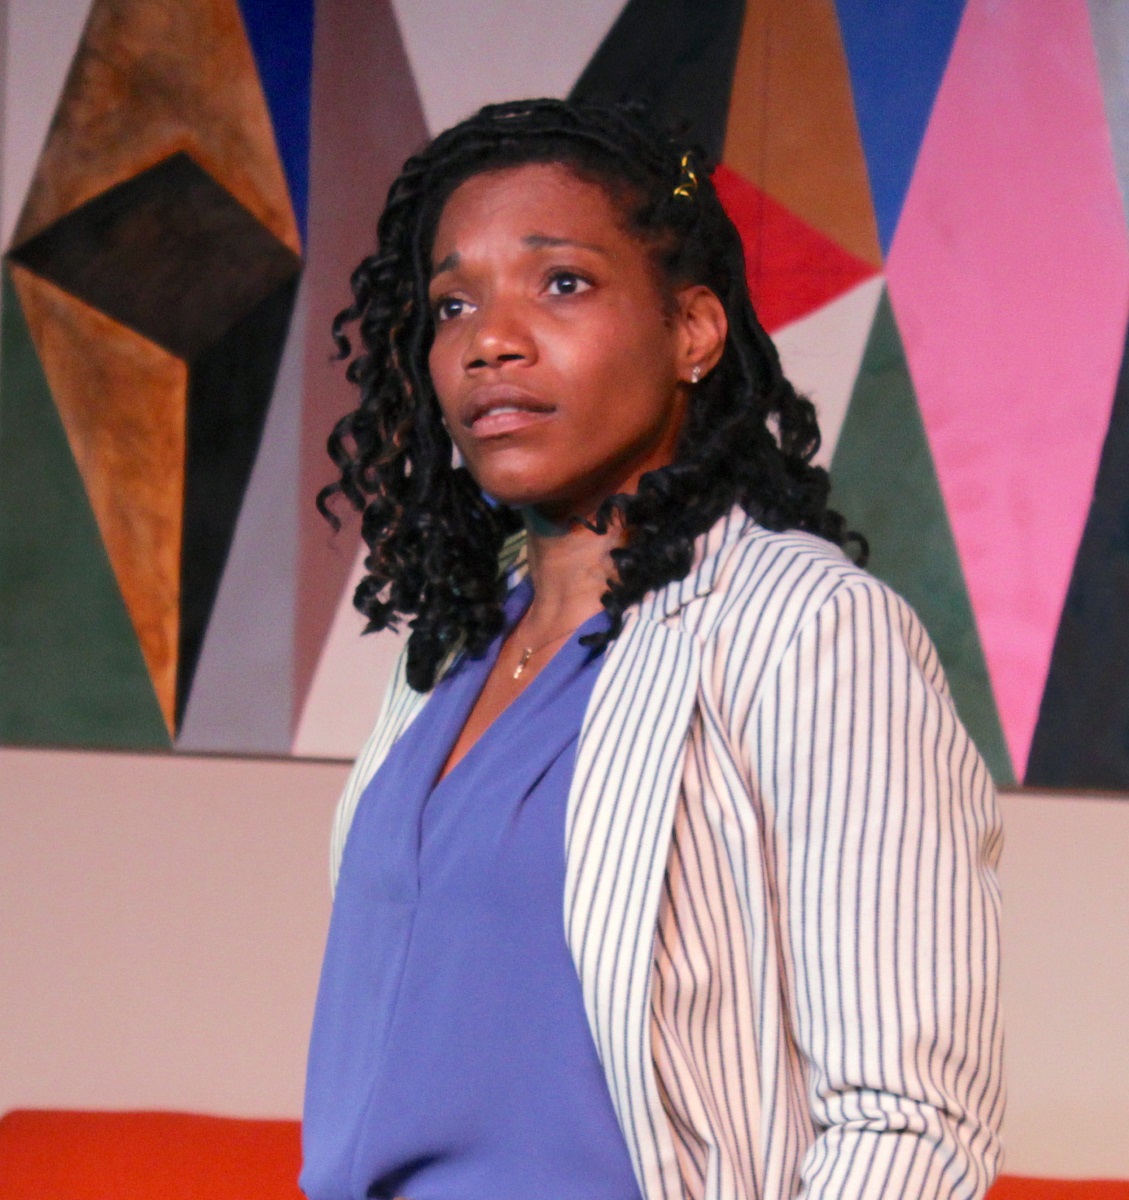 Stagestruck: Minority Report — Women and people of color on summer-theater stages